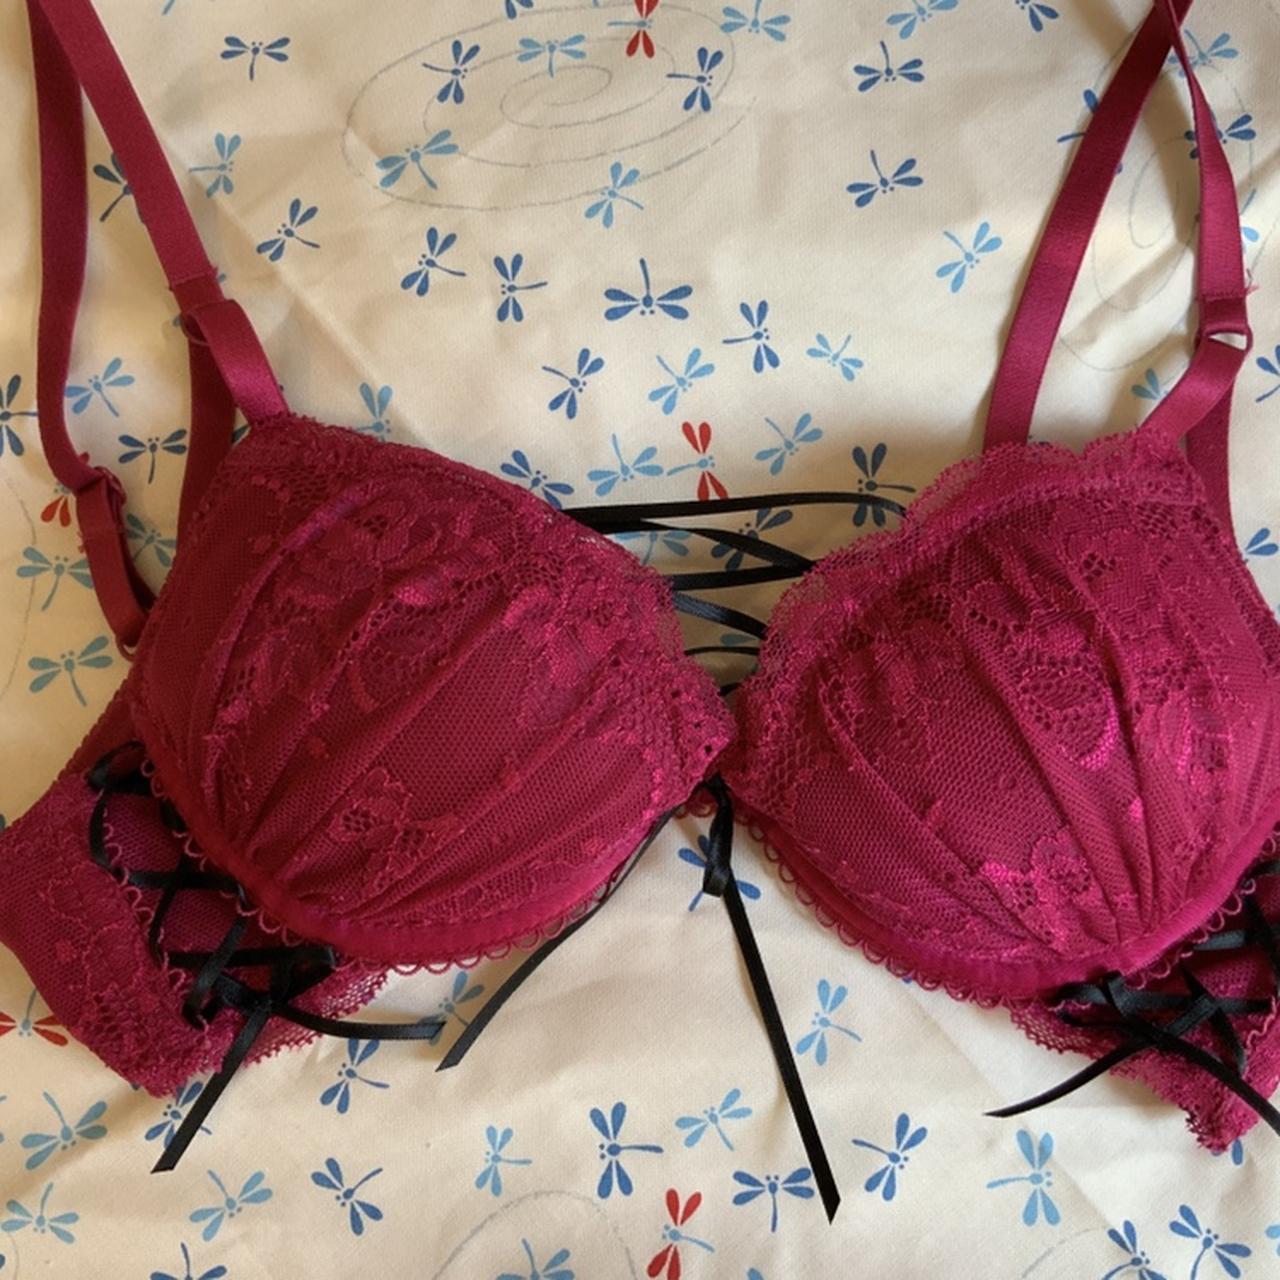 ❣️❣️BRA SIZE IN JAPANESE❣️❣️ B66 = US 30A!! Band size is - Depop